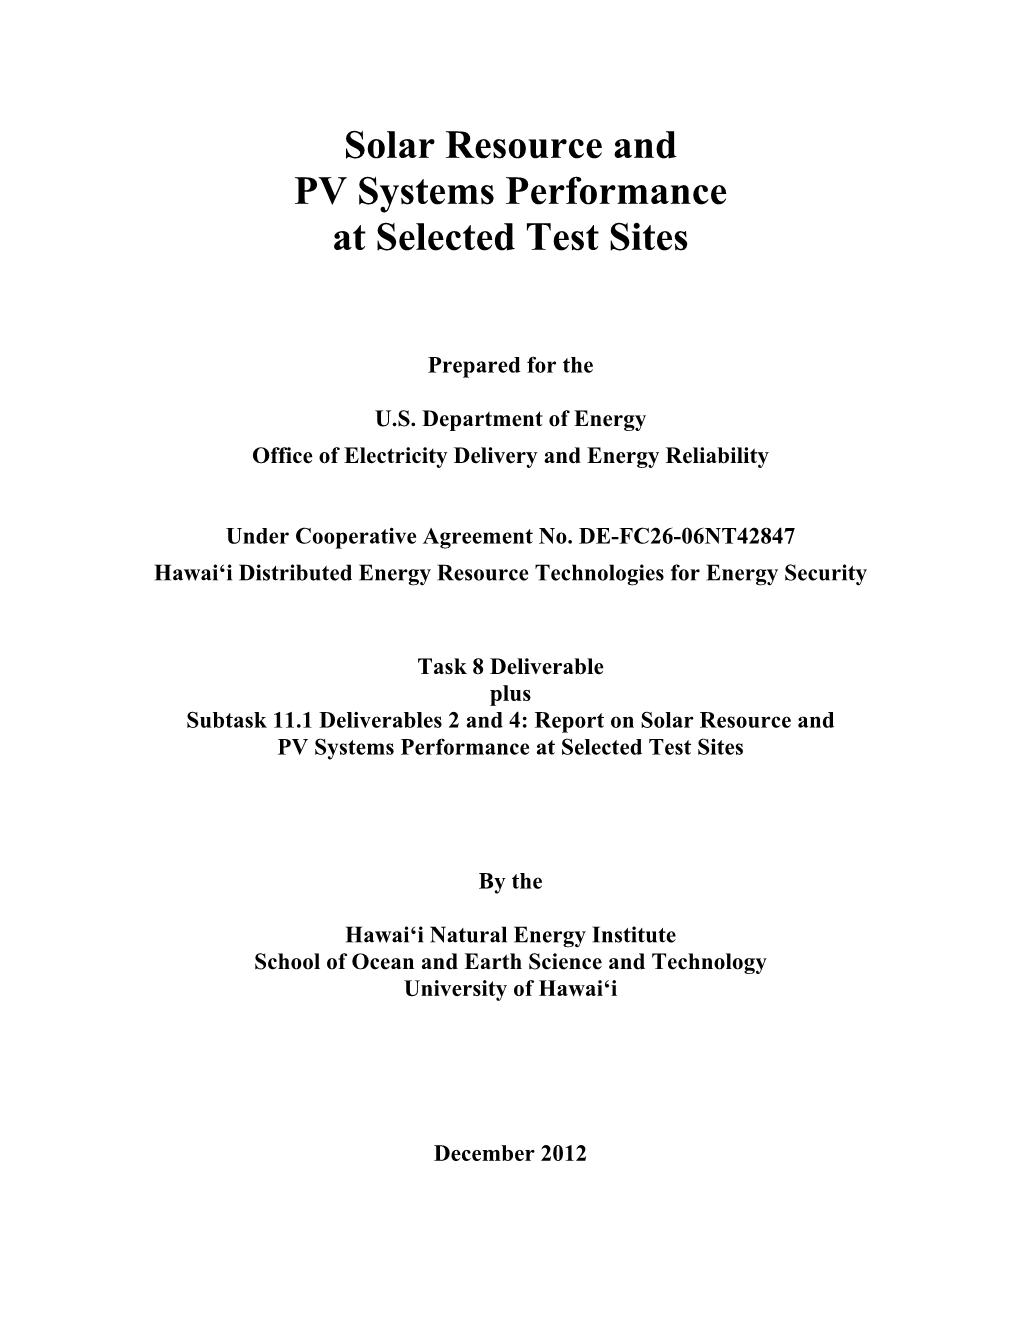 Solar Resource and PV Systems Performance at Selected Test Sites